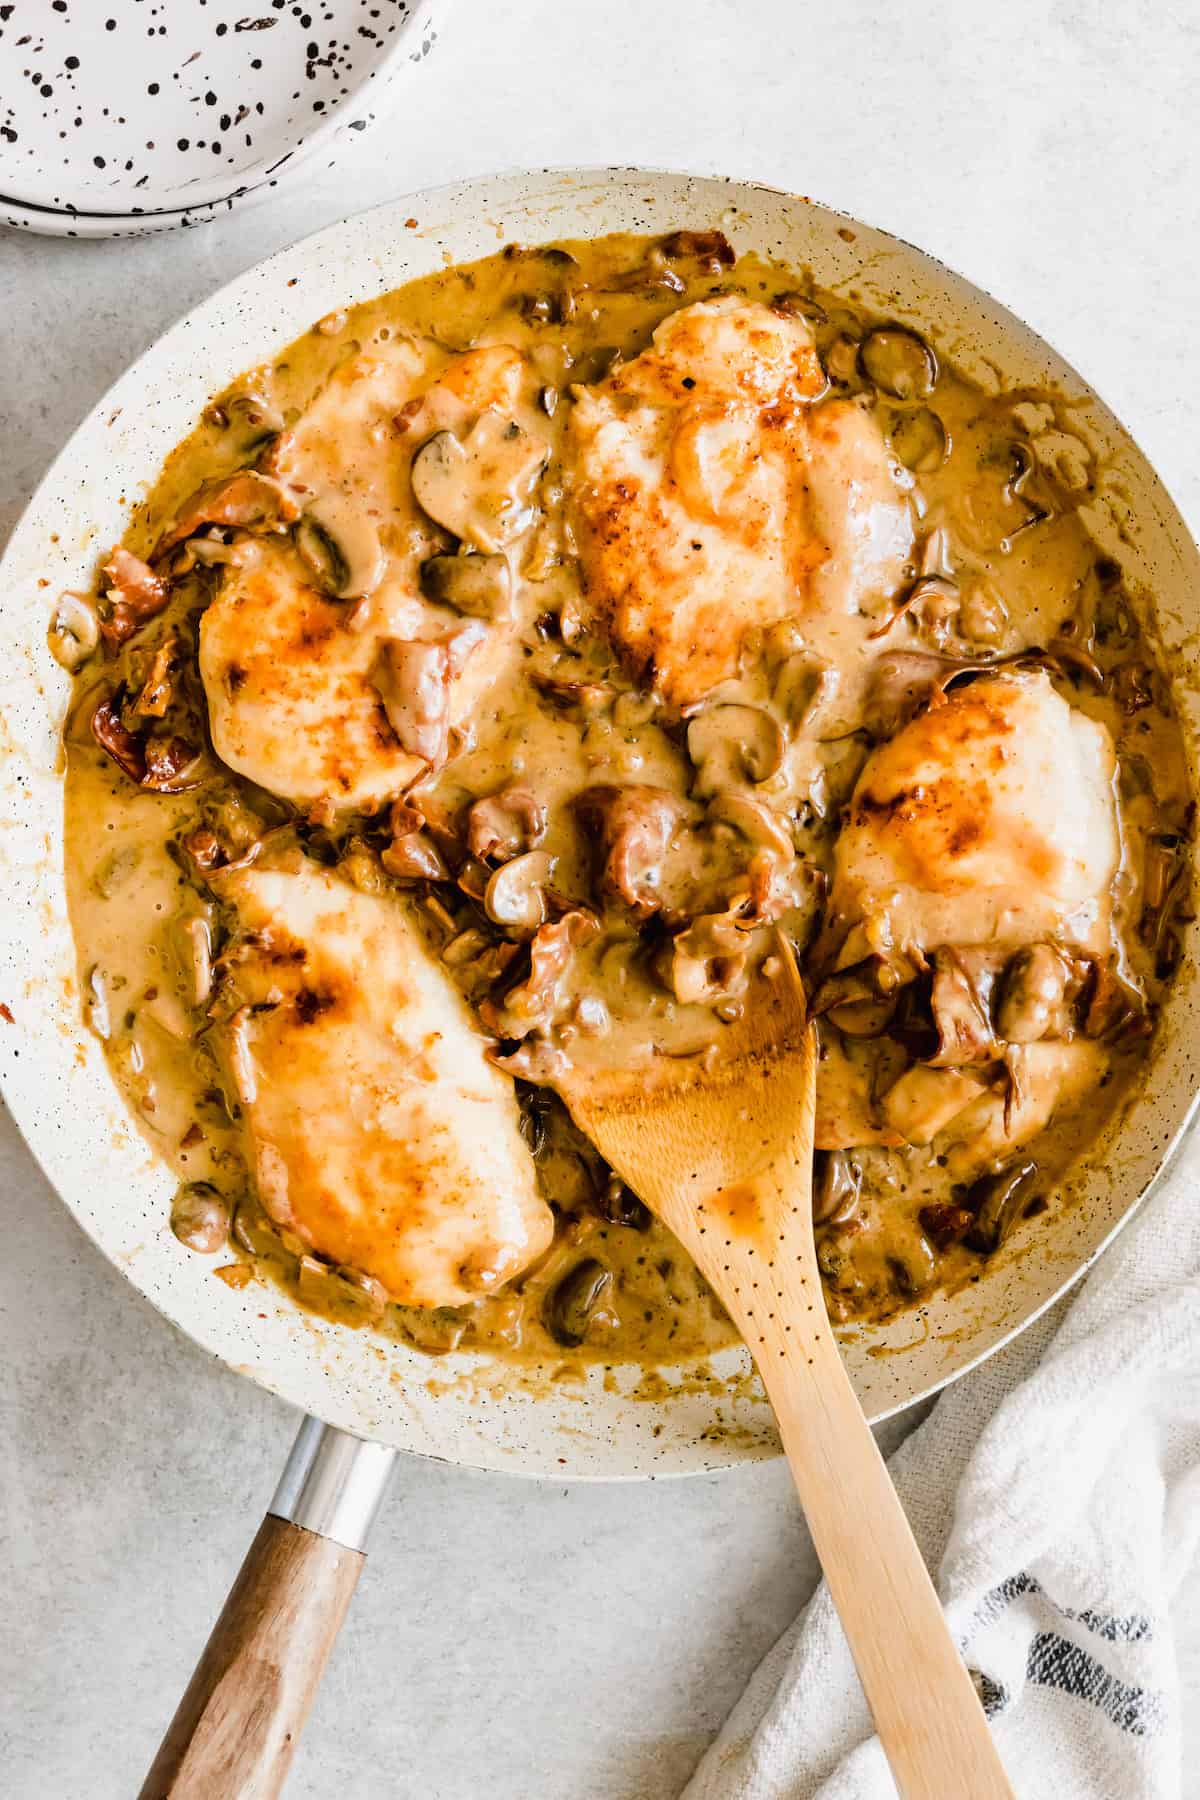 Four pieces of chicken in a mushroom marsala sauce.